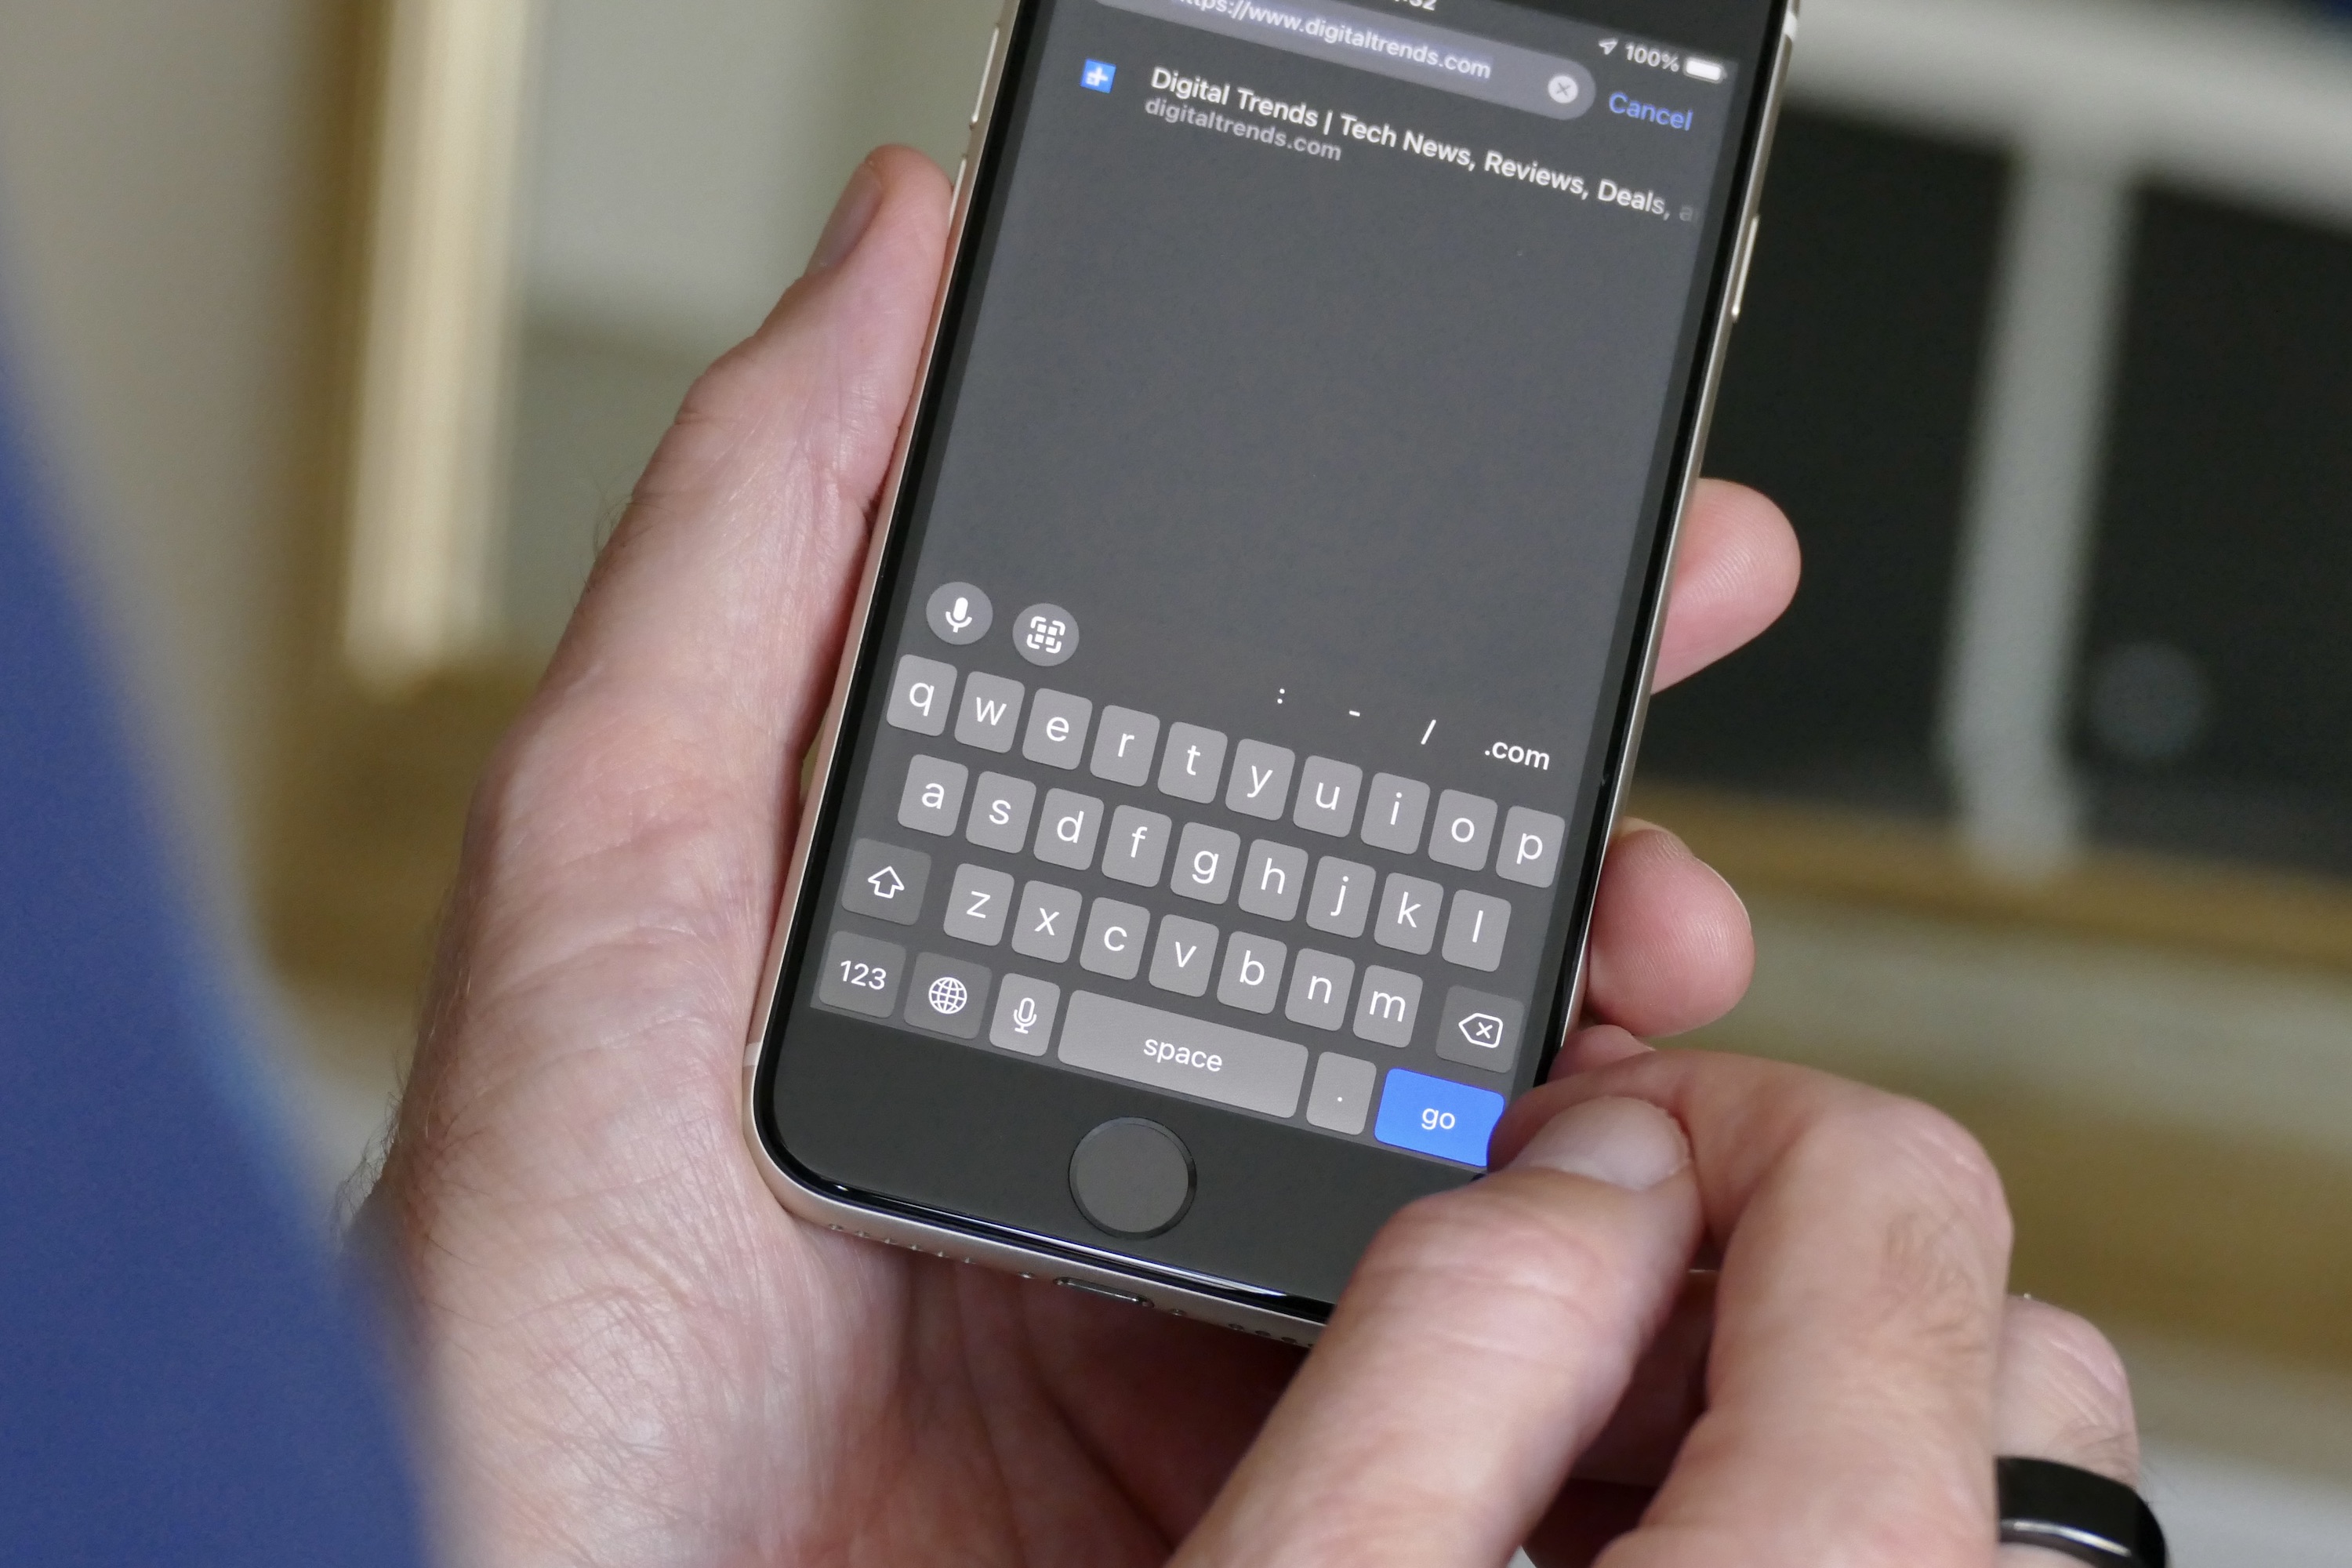 The Apple iPhone SE (2022) screen showing the keyboard.